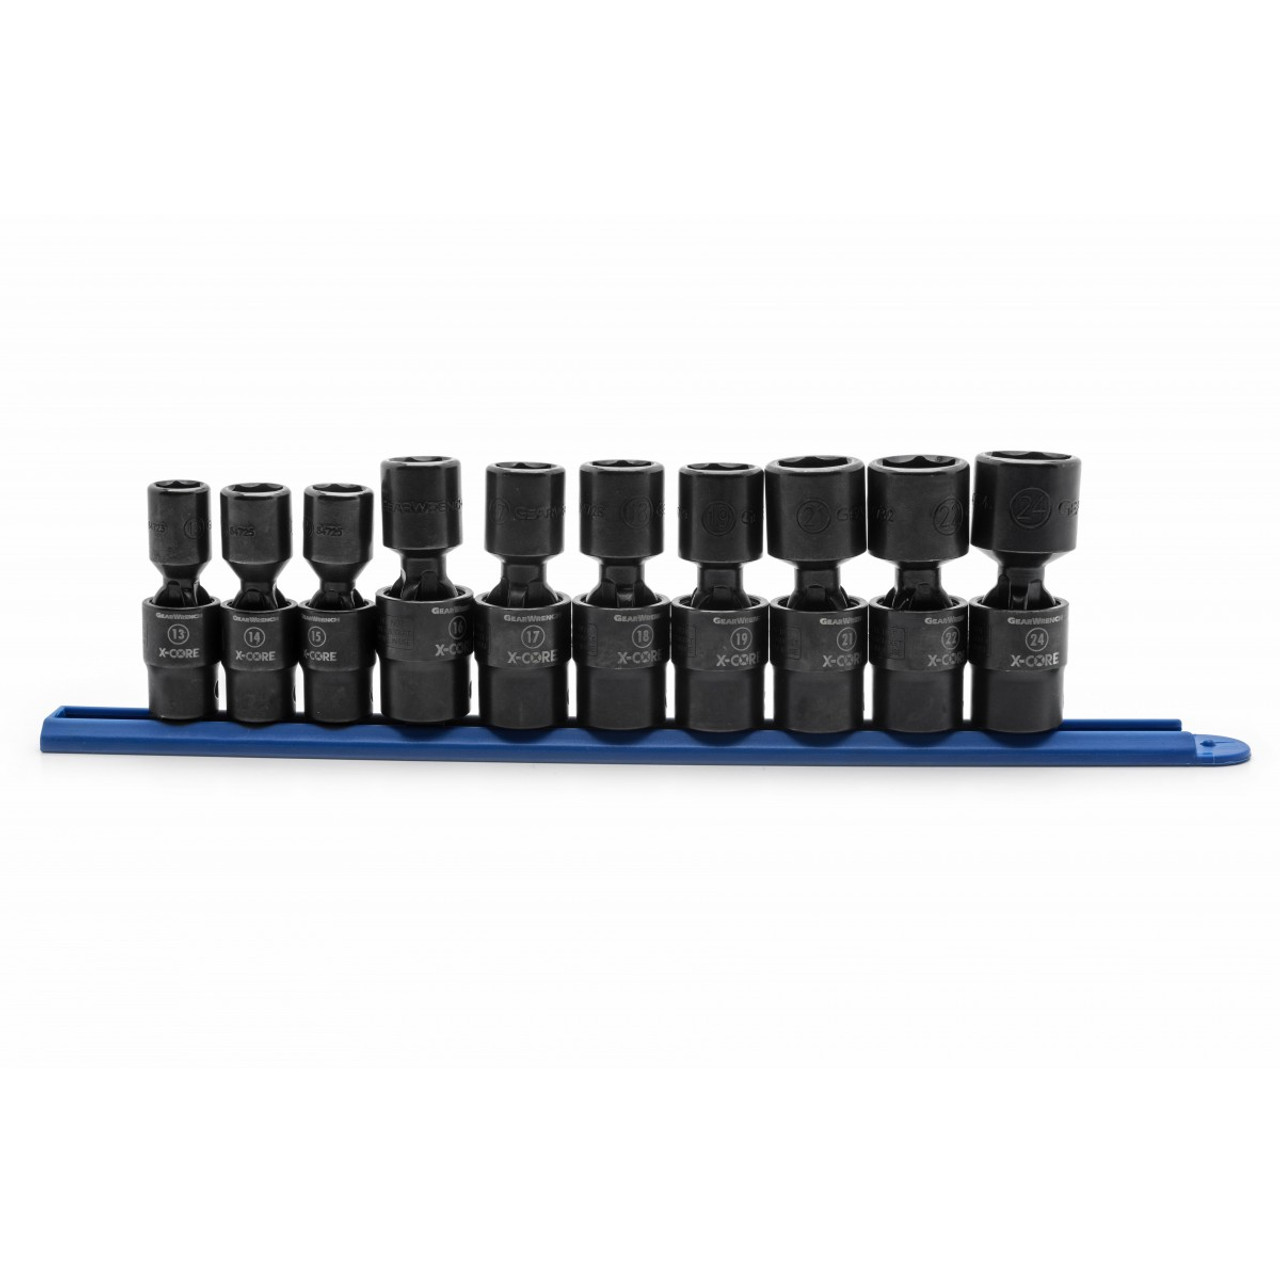 Gearwrench 10 Pc. 1/2" Drive 6 Point Standard X-Core Pinless Universal Impact Metric Socket Set 84979